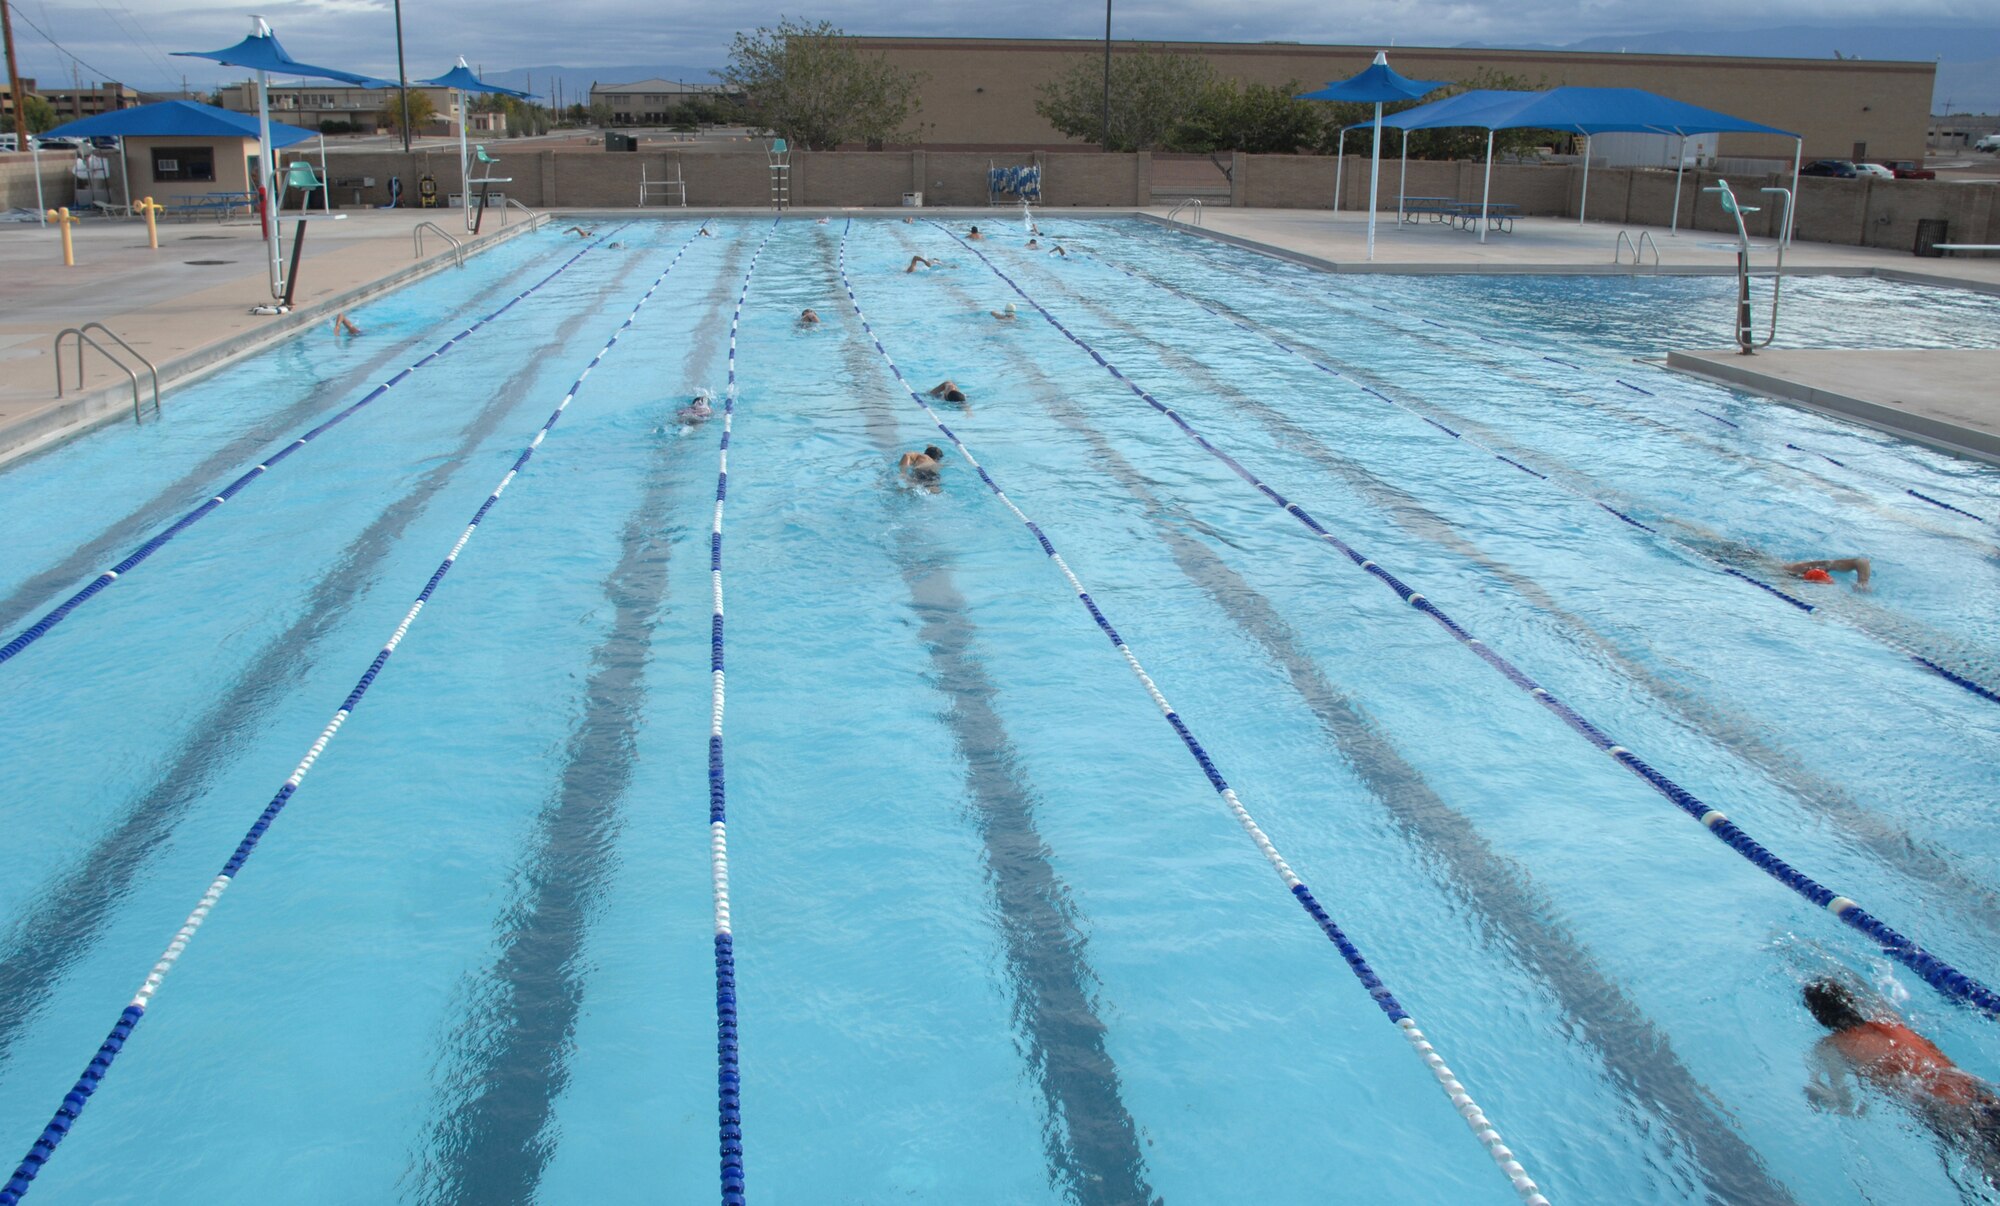 Athletes swim 700 meters in the Aquatic Center pool before completing the annual Triathlon at Holloman Air Force Base, N.M., October 21. The Triathlon was open to everyone who signed up and more than 60 athletes participated. (U.S. Air Force photo/Airman Sondra M. Escutia)